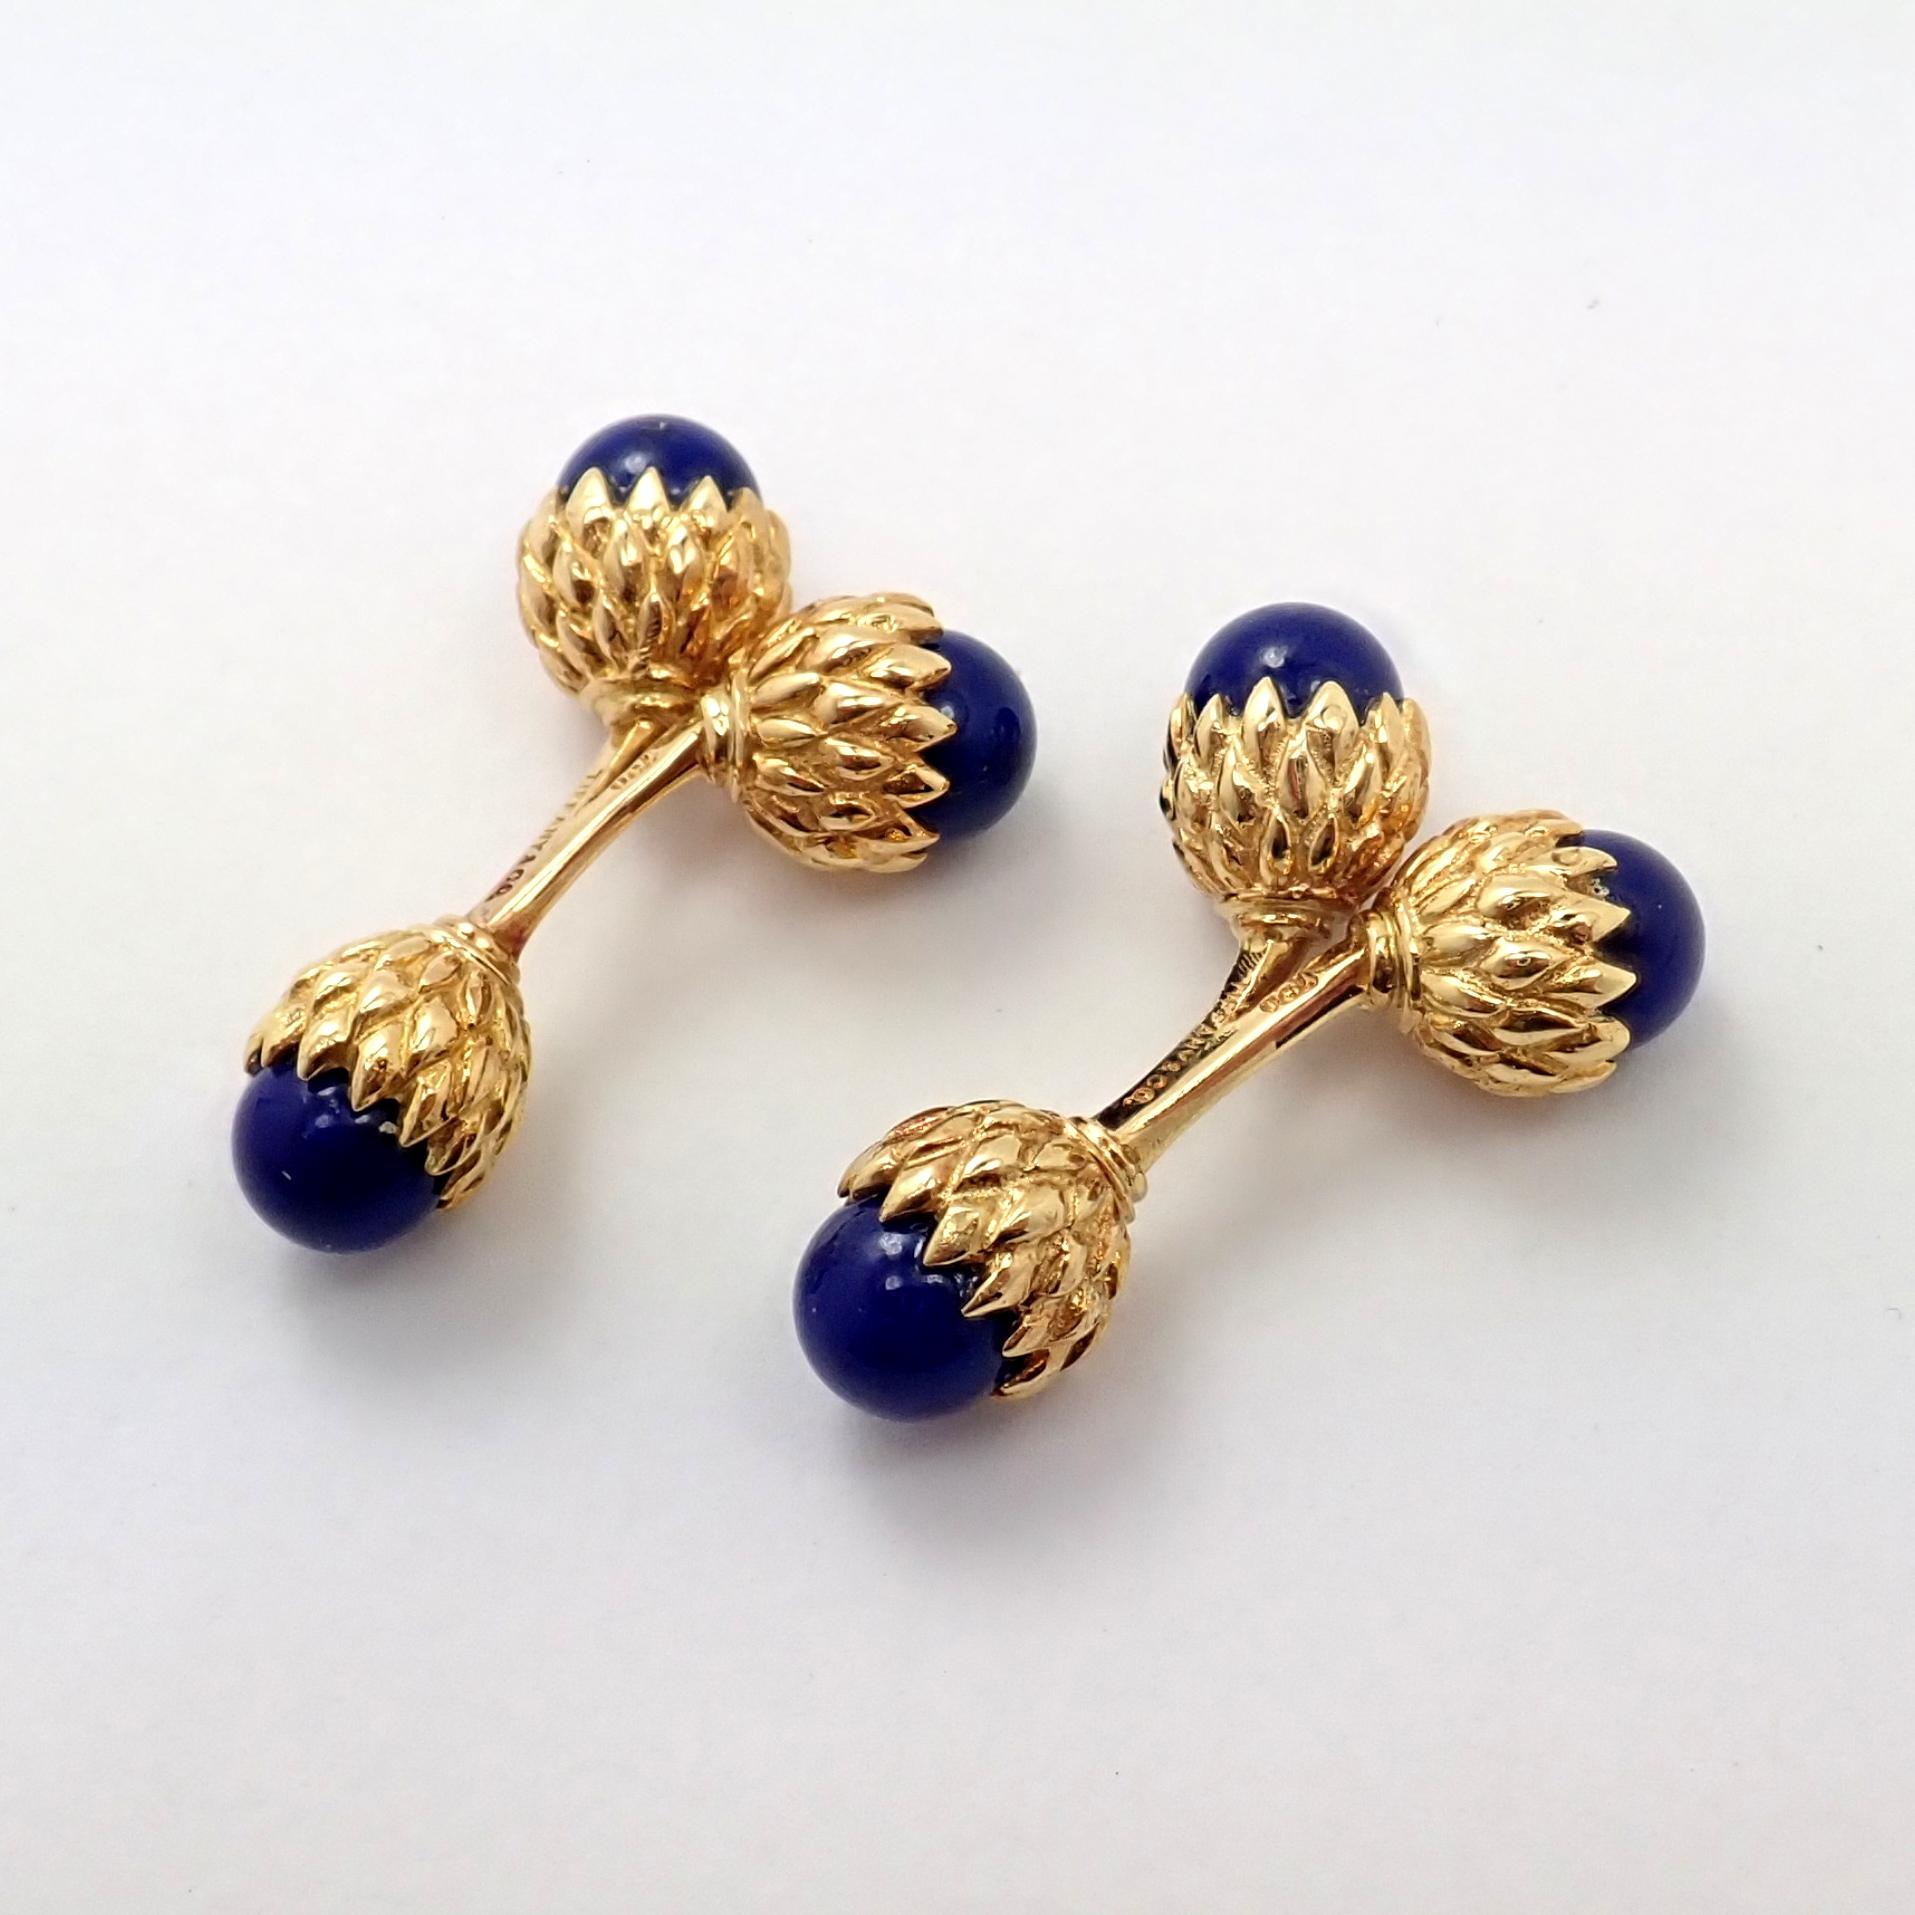 18k Yellow Lapis Lazuli Jean Schlumberger Double Acorn Cufflinks for Tiffany & Co. With 6 lapis lazuli stones 

Details: 
Dimensions: 30mm x 20mm
Weight: 19.6 grams
Stamped Hallmarks: Tiffany & Co. Schlumberger 750

*Free Shipping within the United